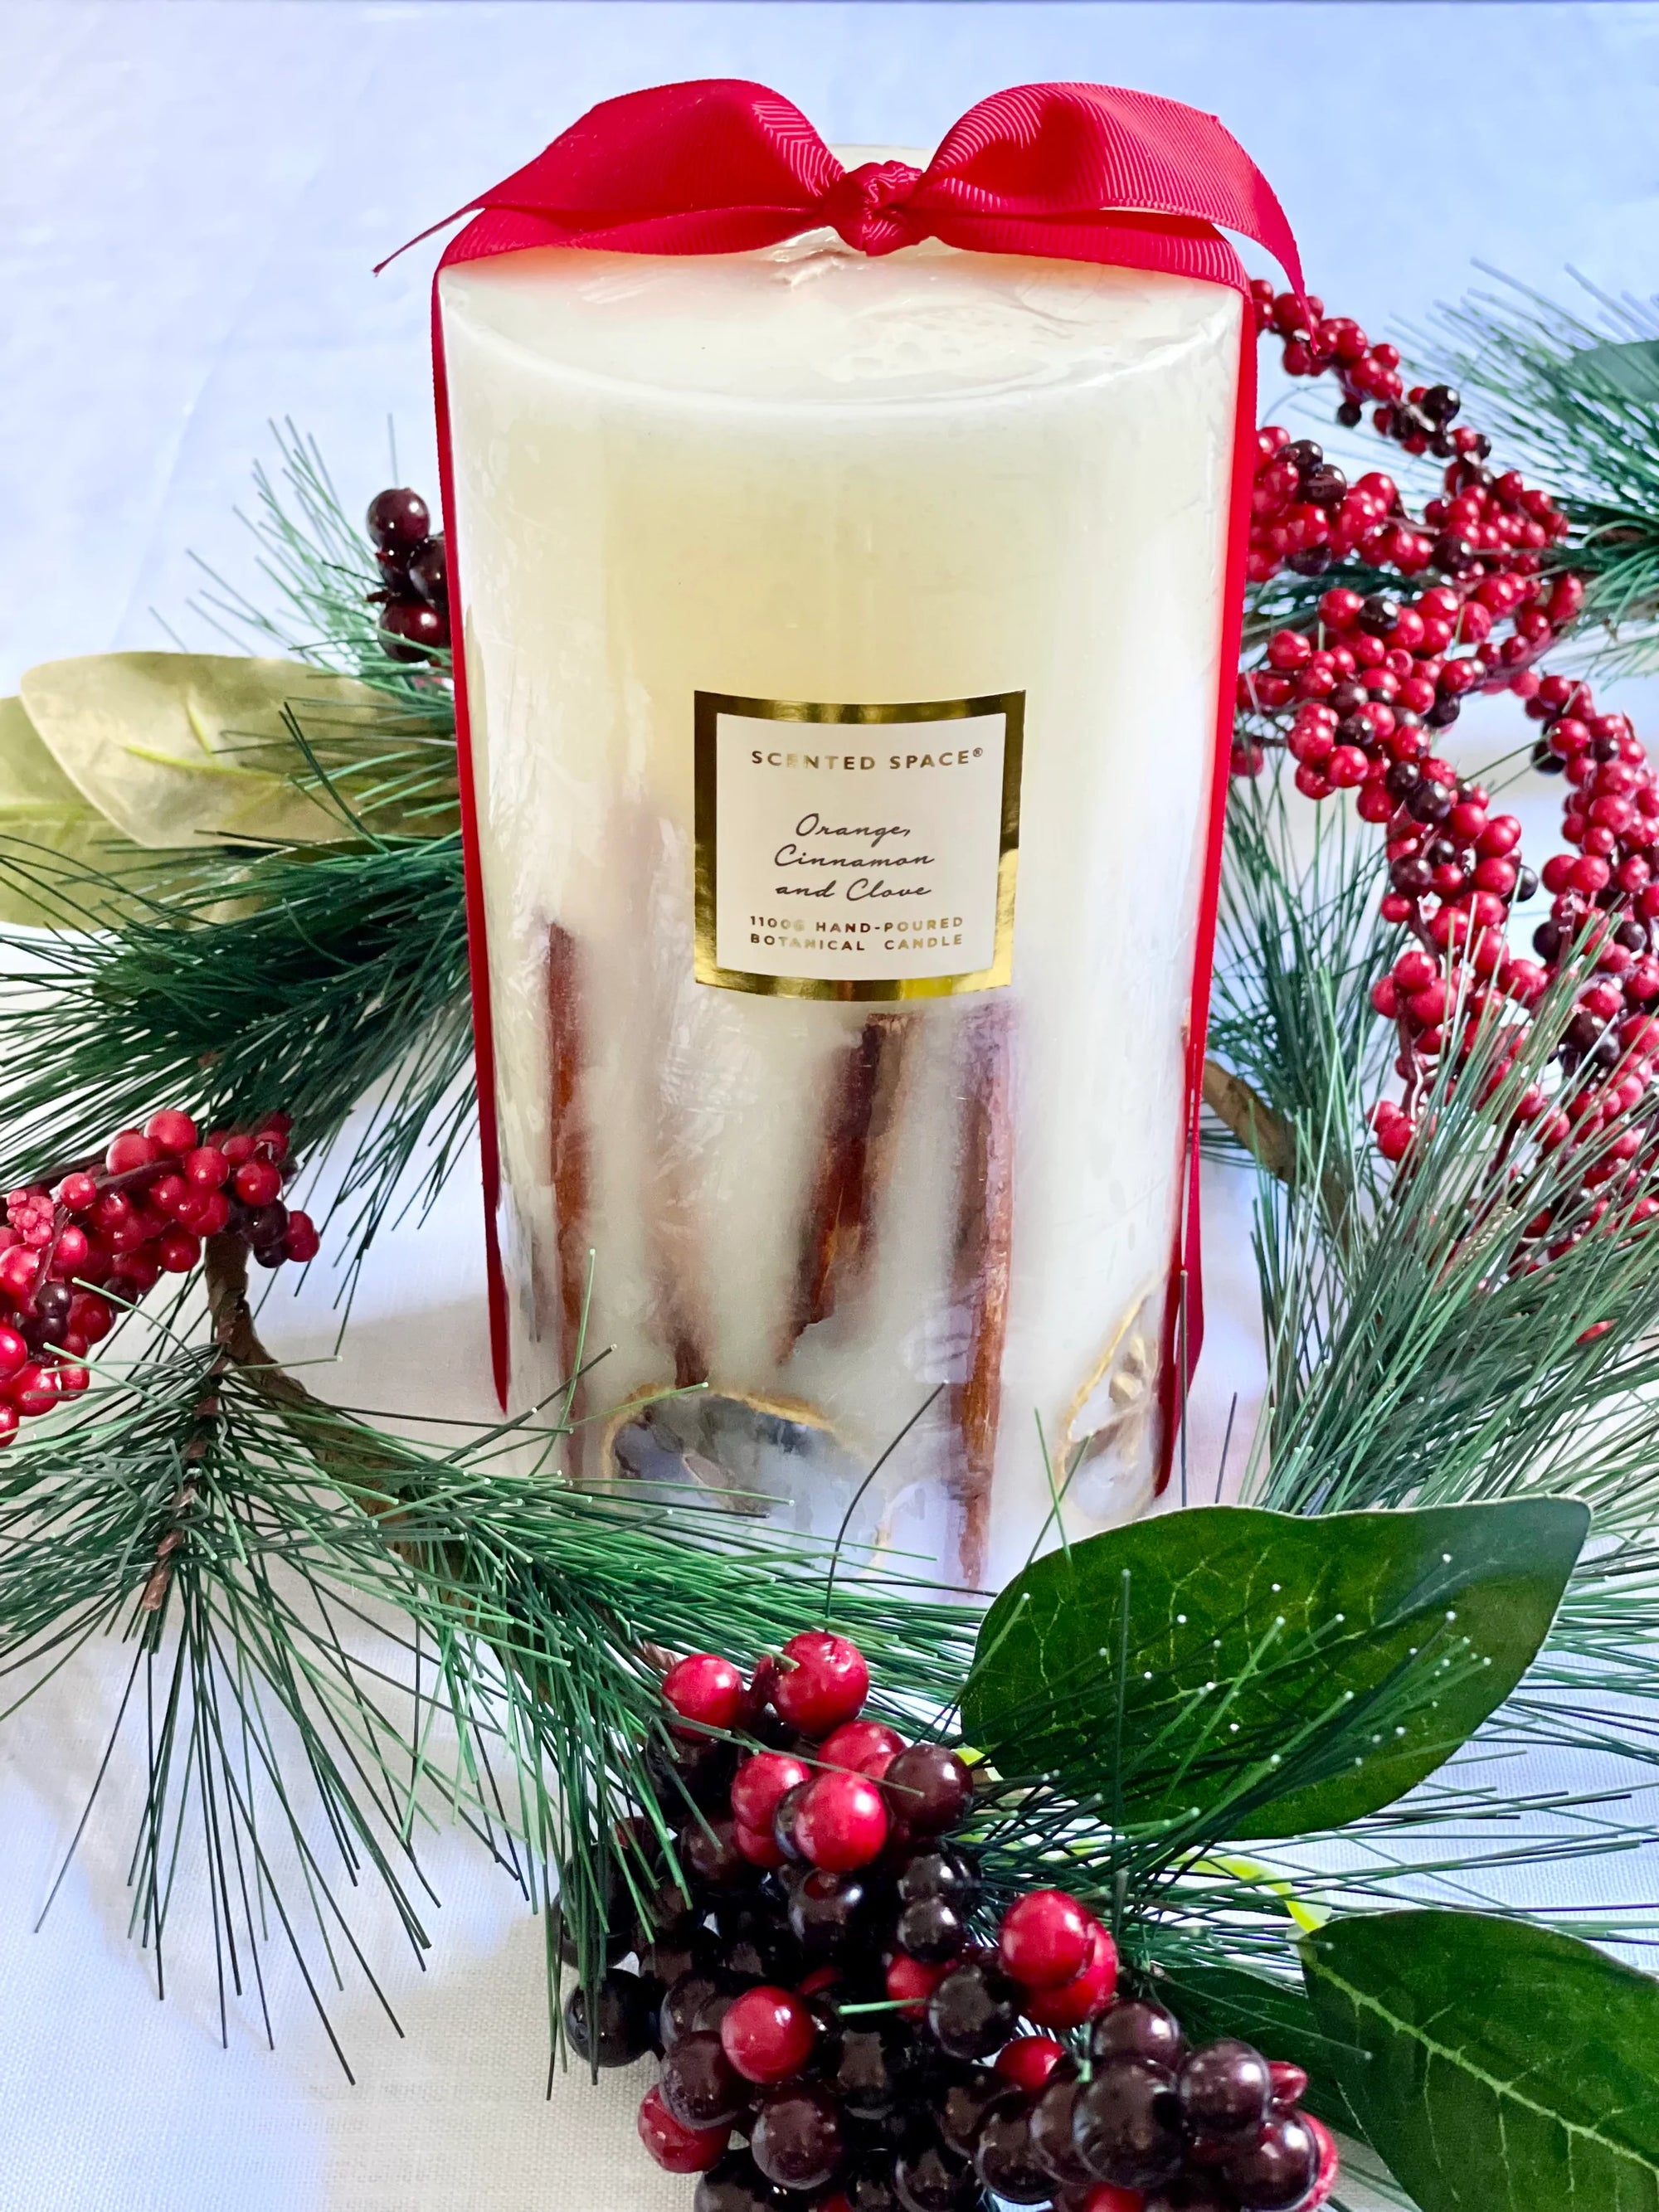 Mill & Hide - Apsley and Co - Botanical Candle